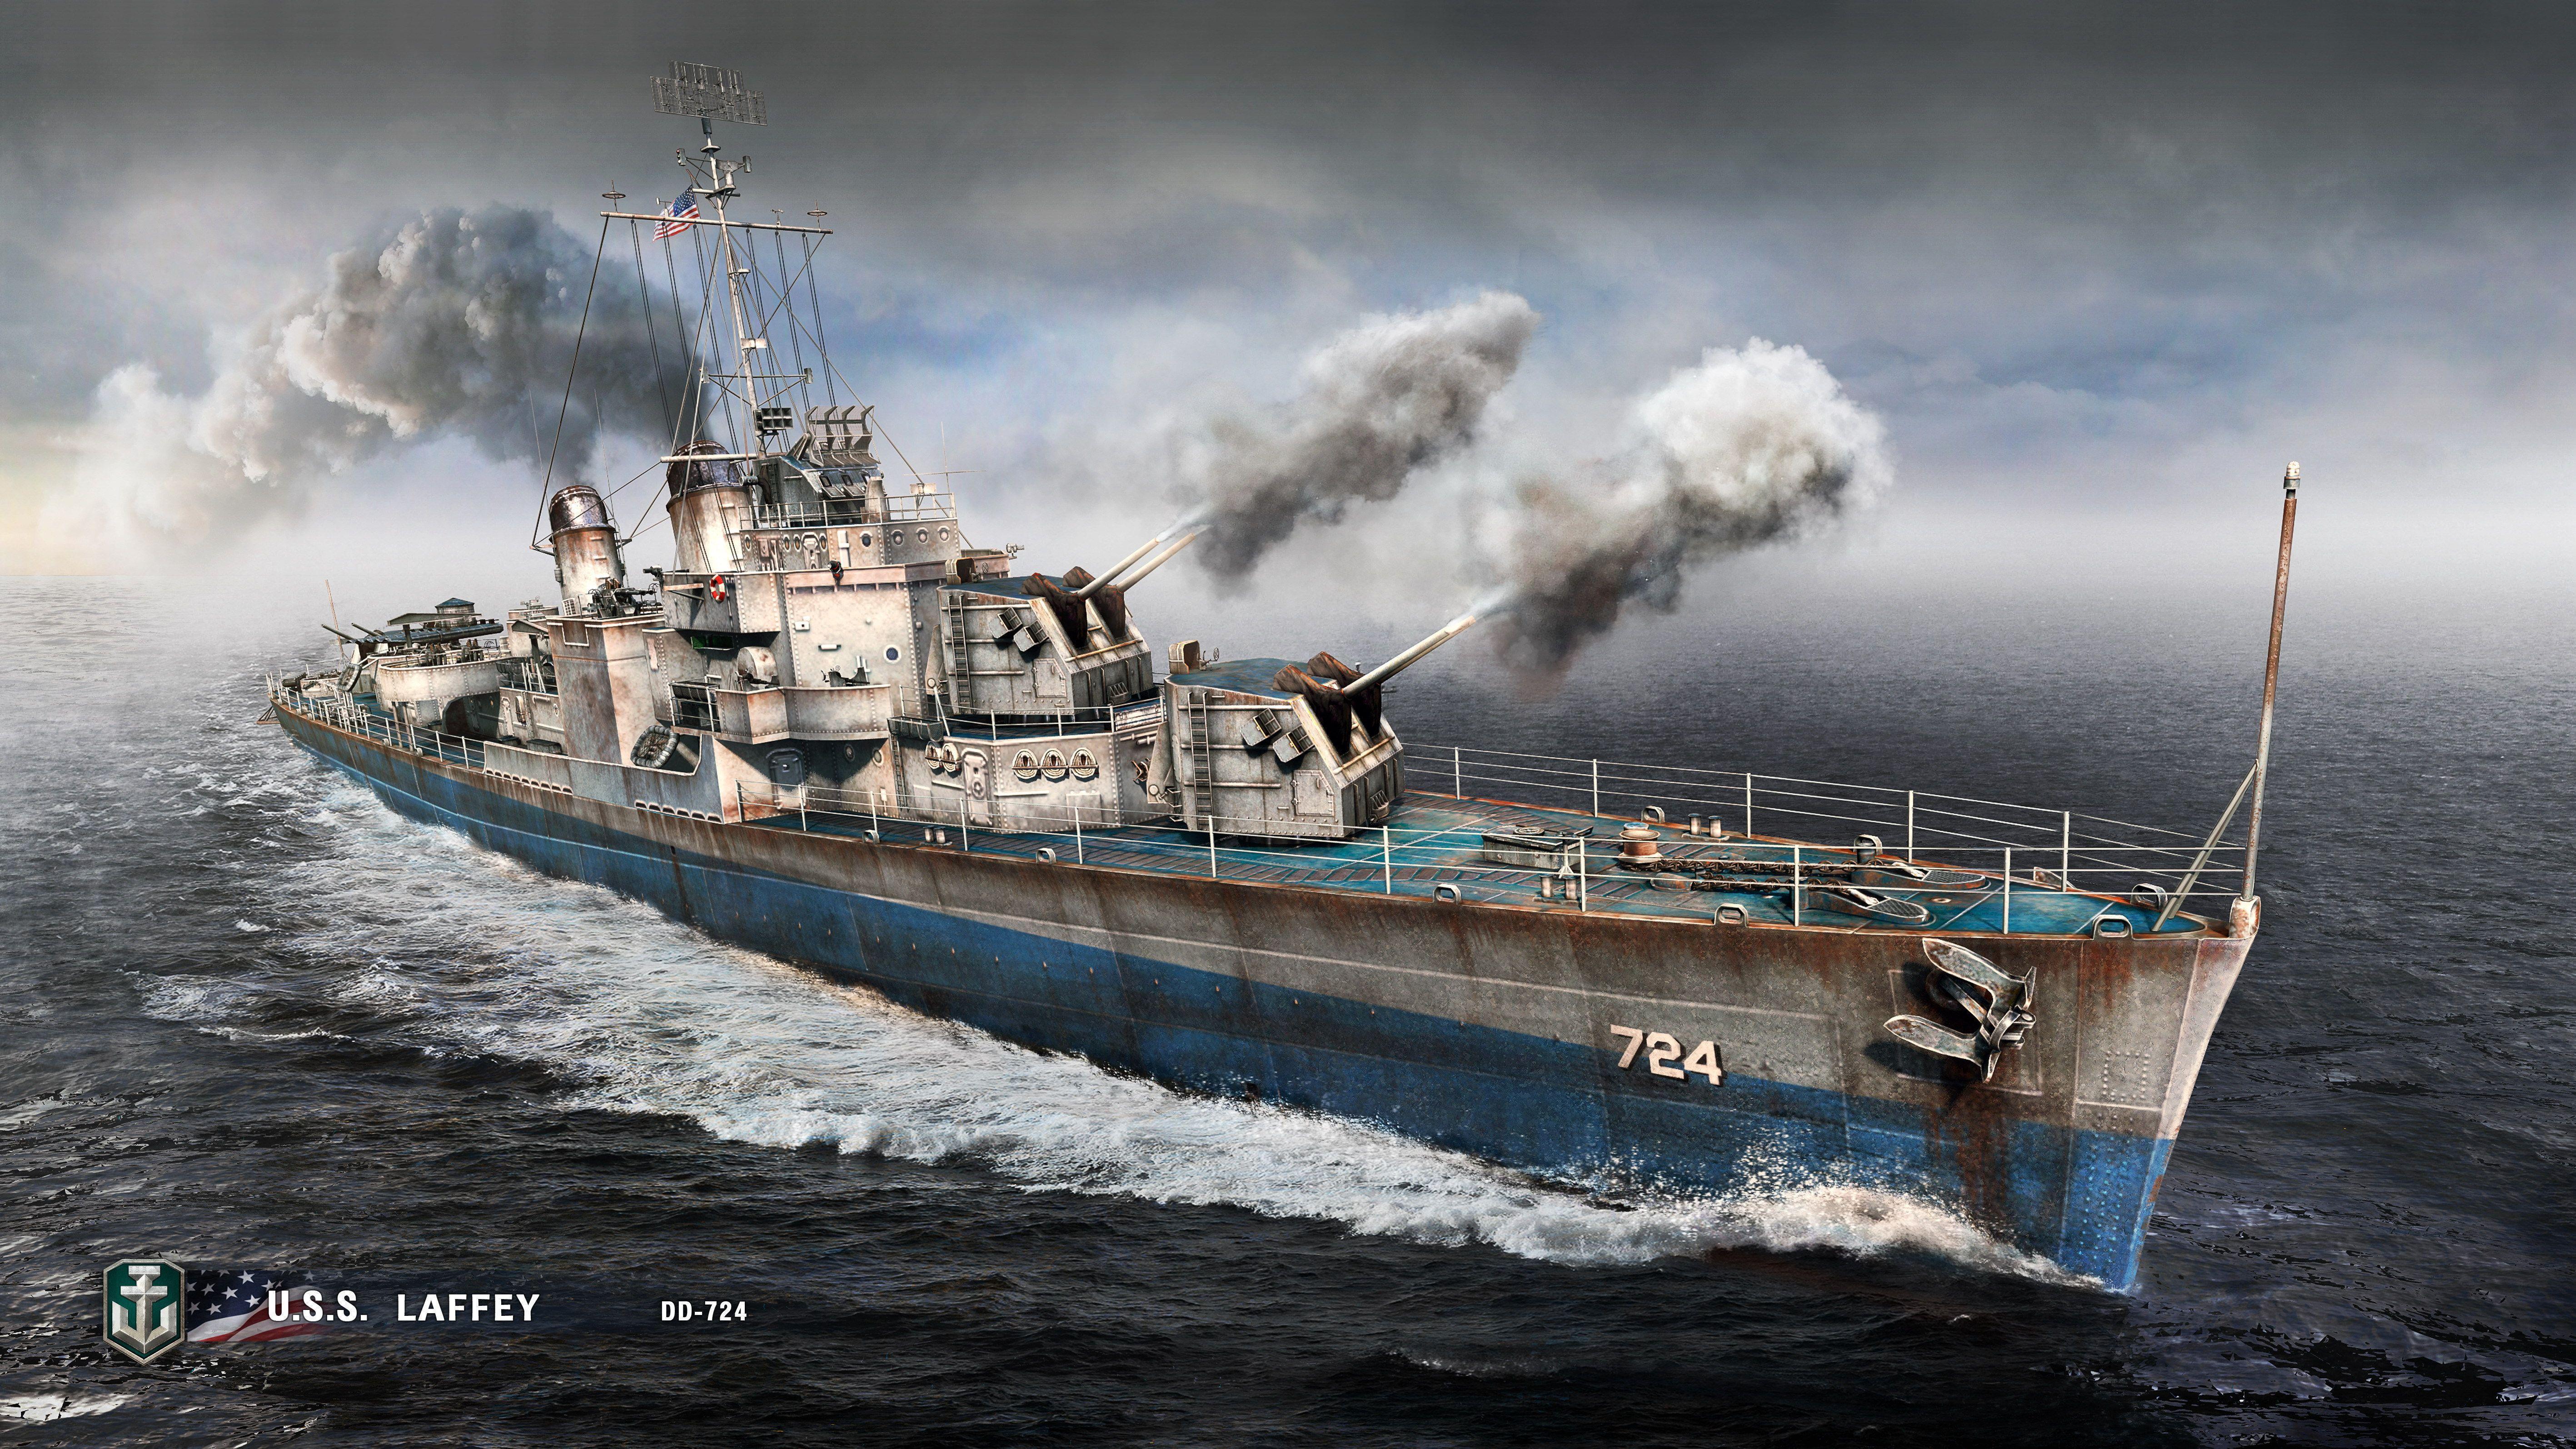 World of Warships Wallpaper Image Photo Picture Background